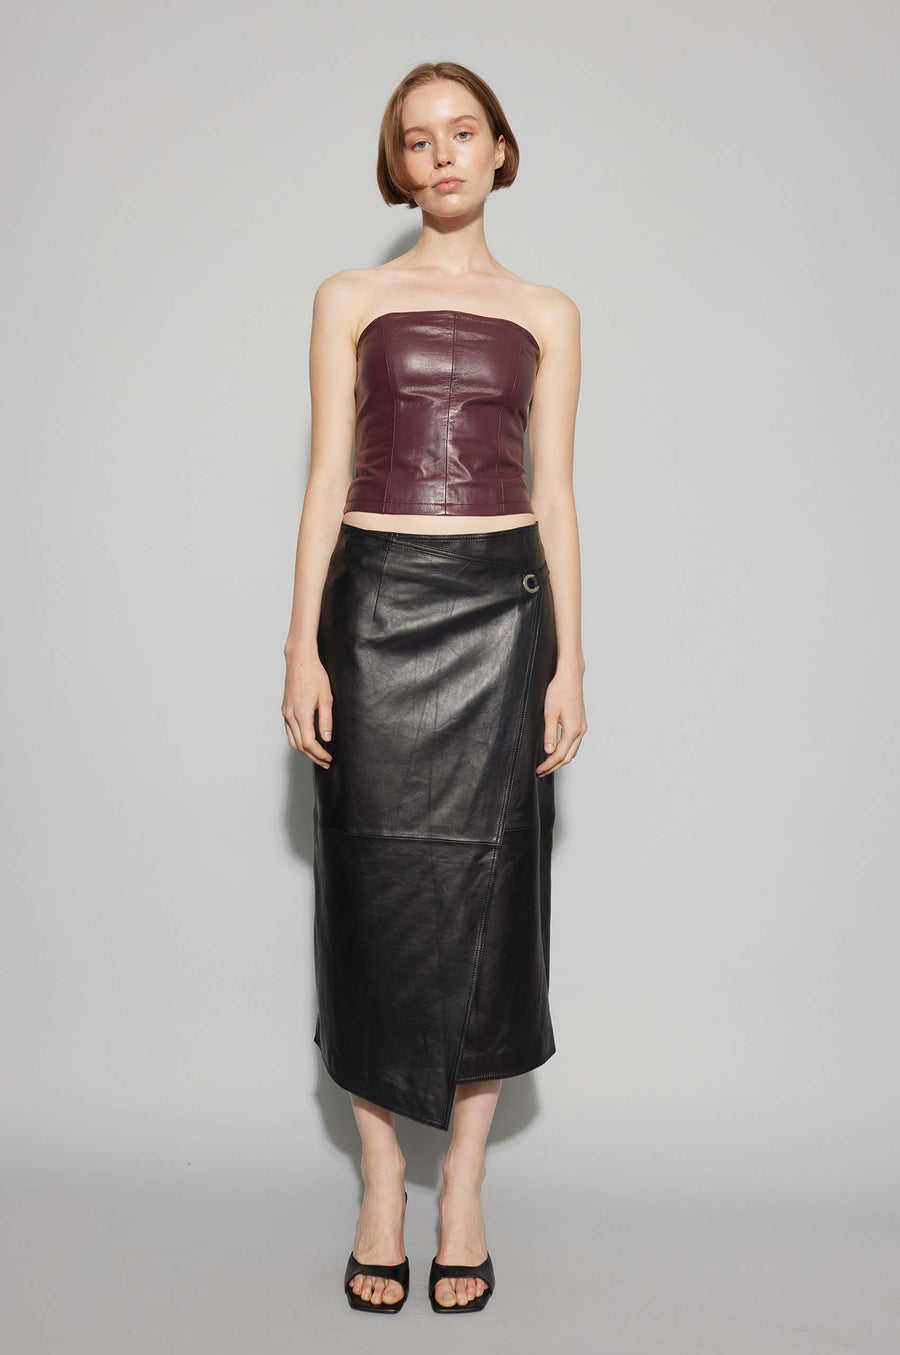 OVAL SQUARE Reflection Leather Top in Windsor Wine